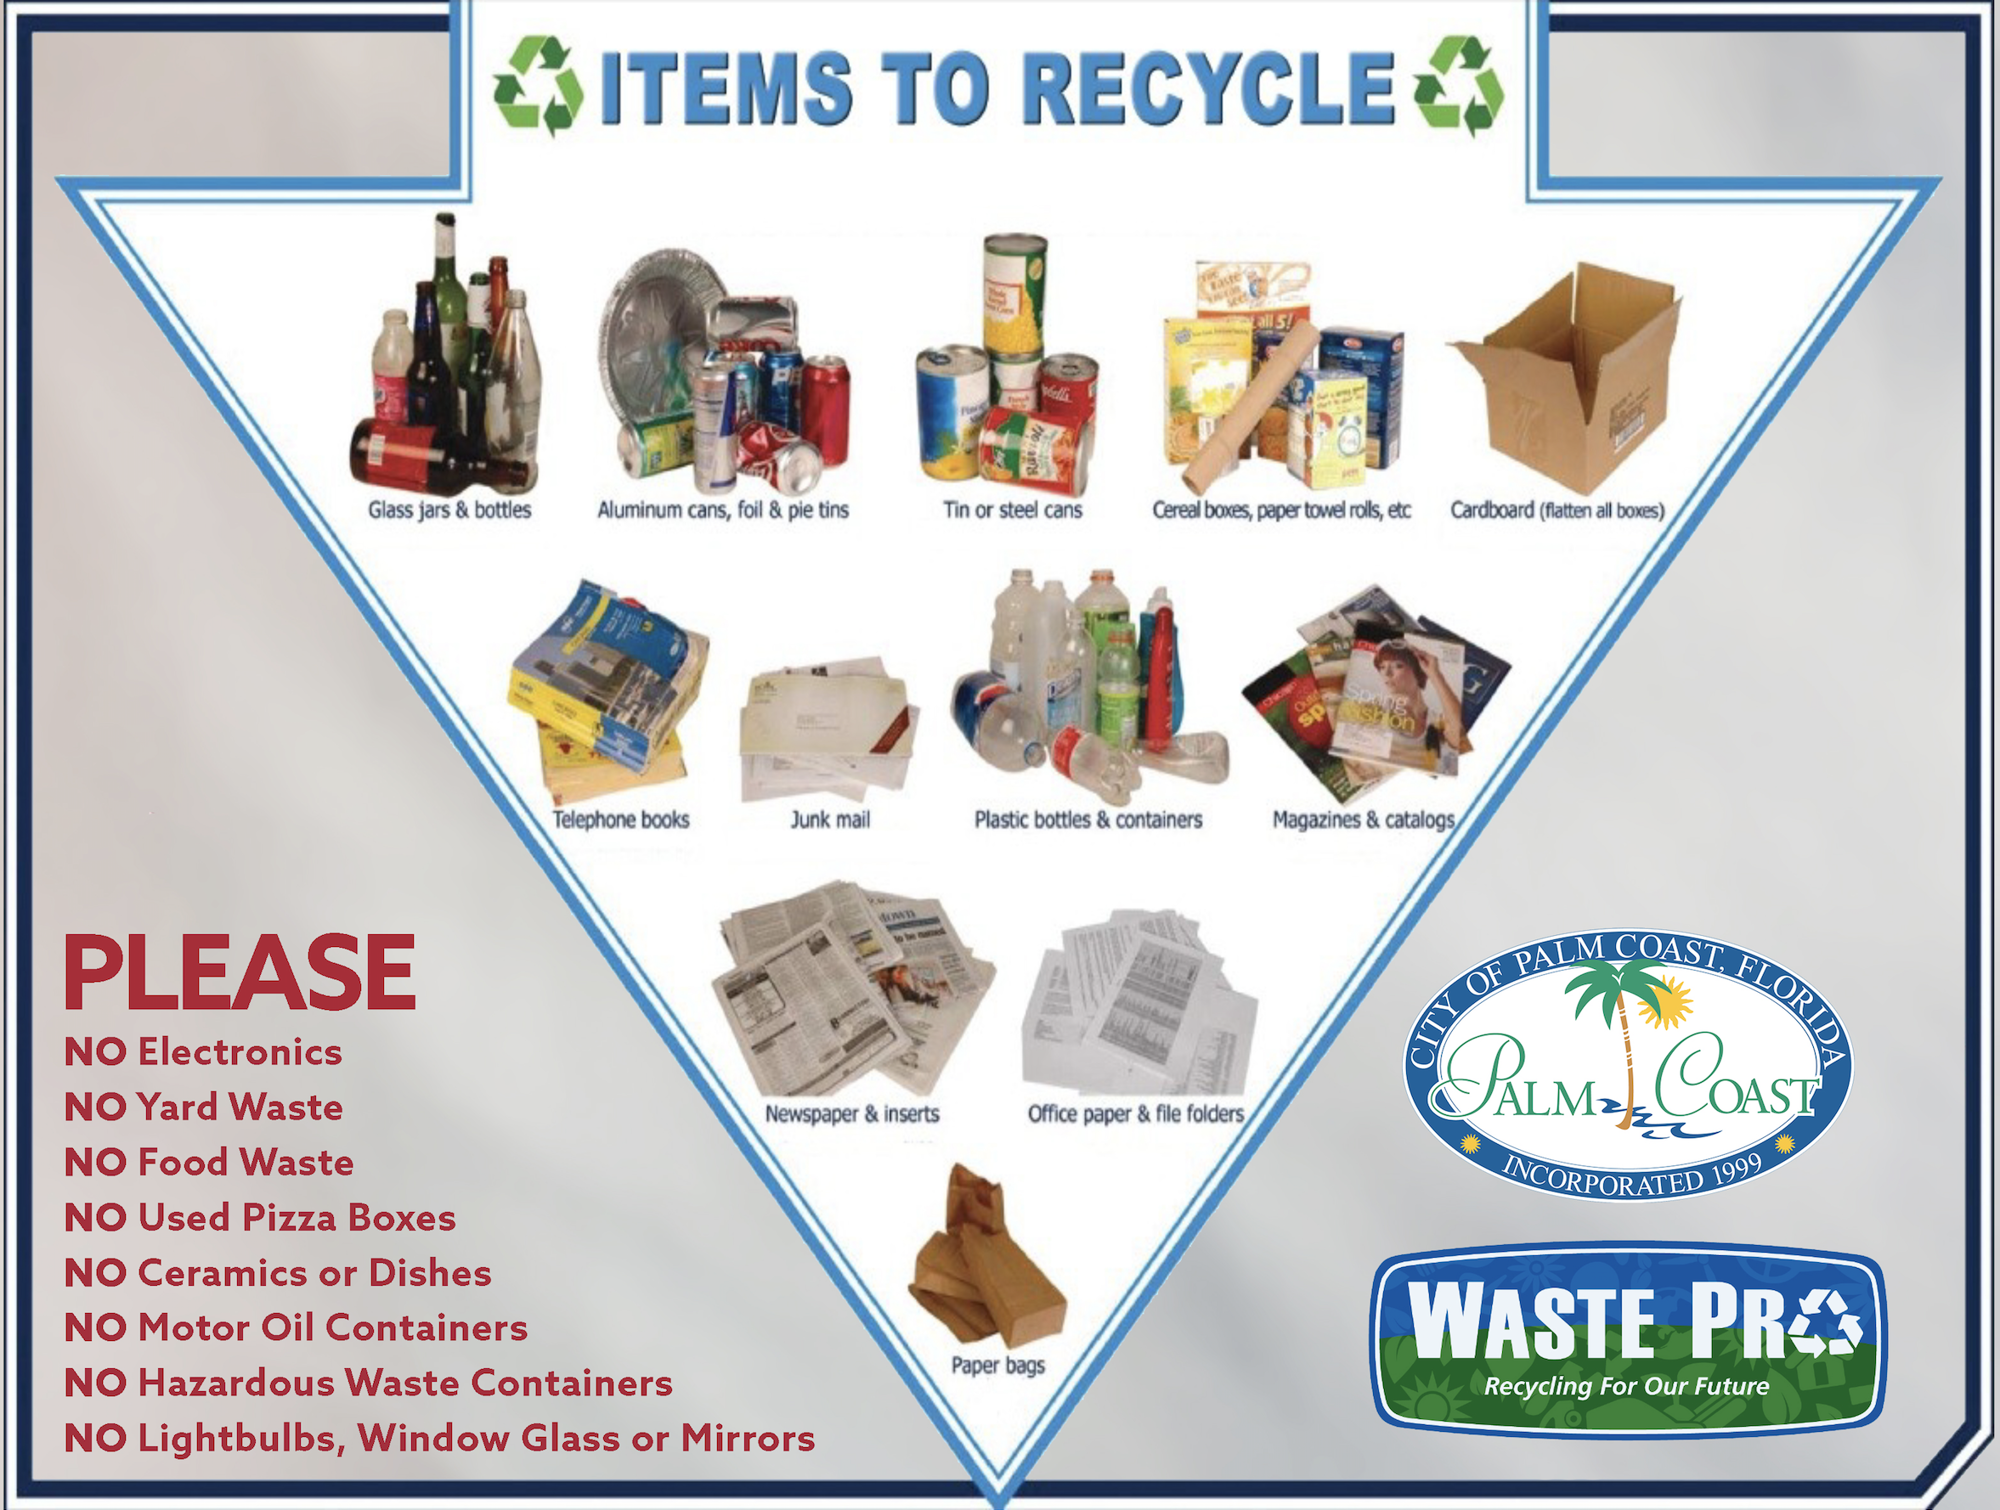 This graphic released by the city shows what items may and may not be recycled.